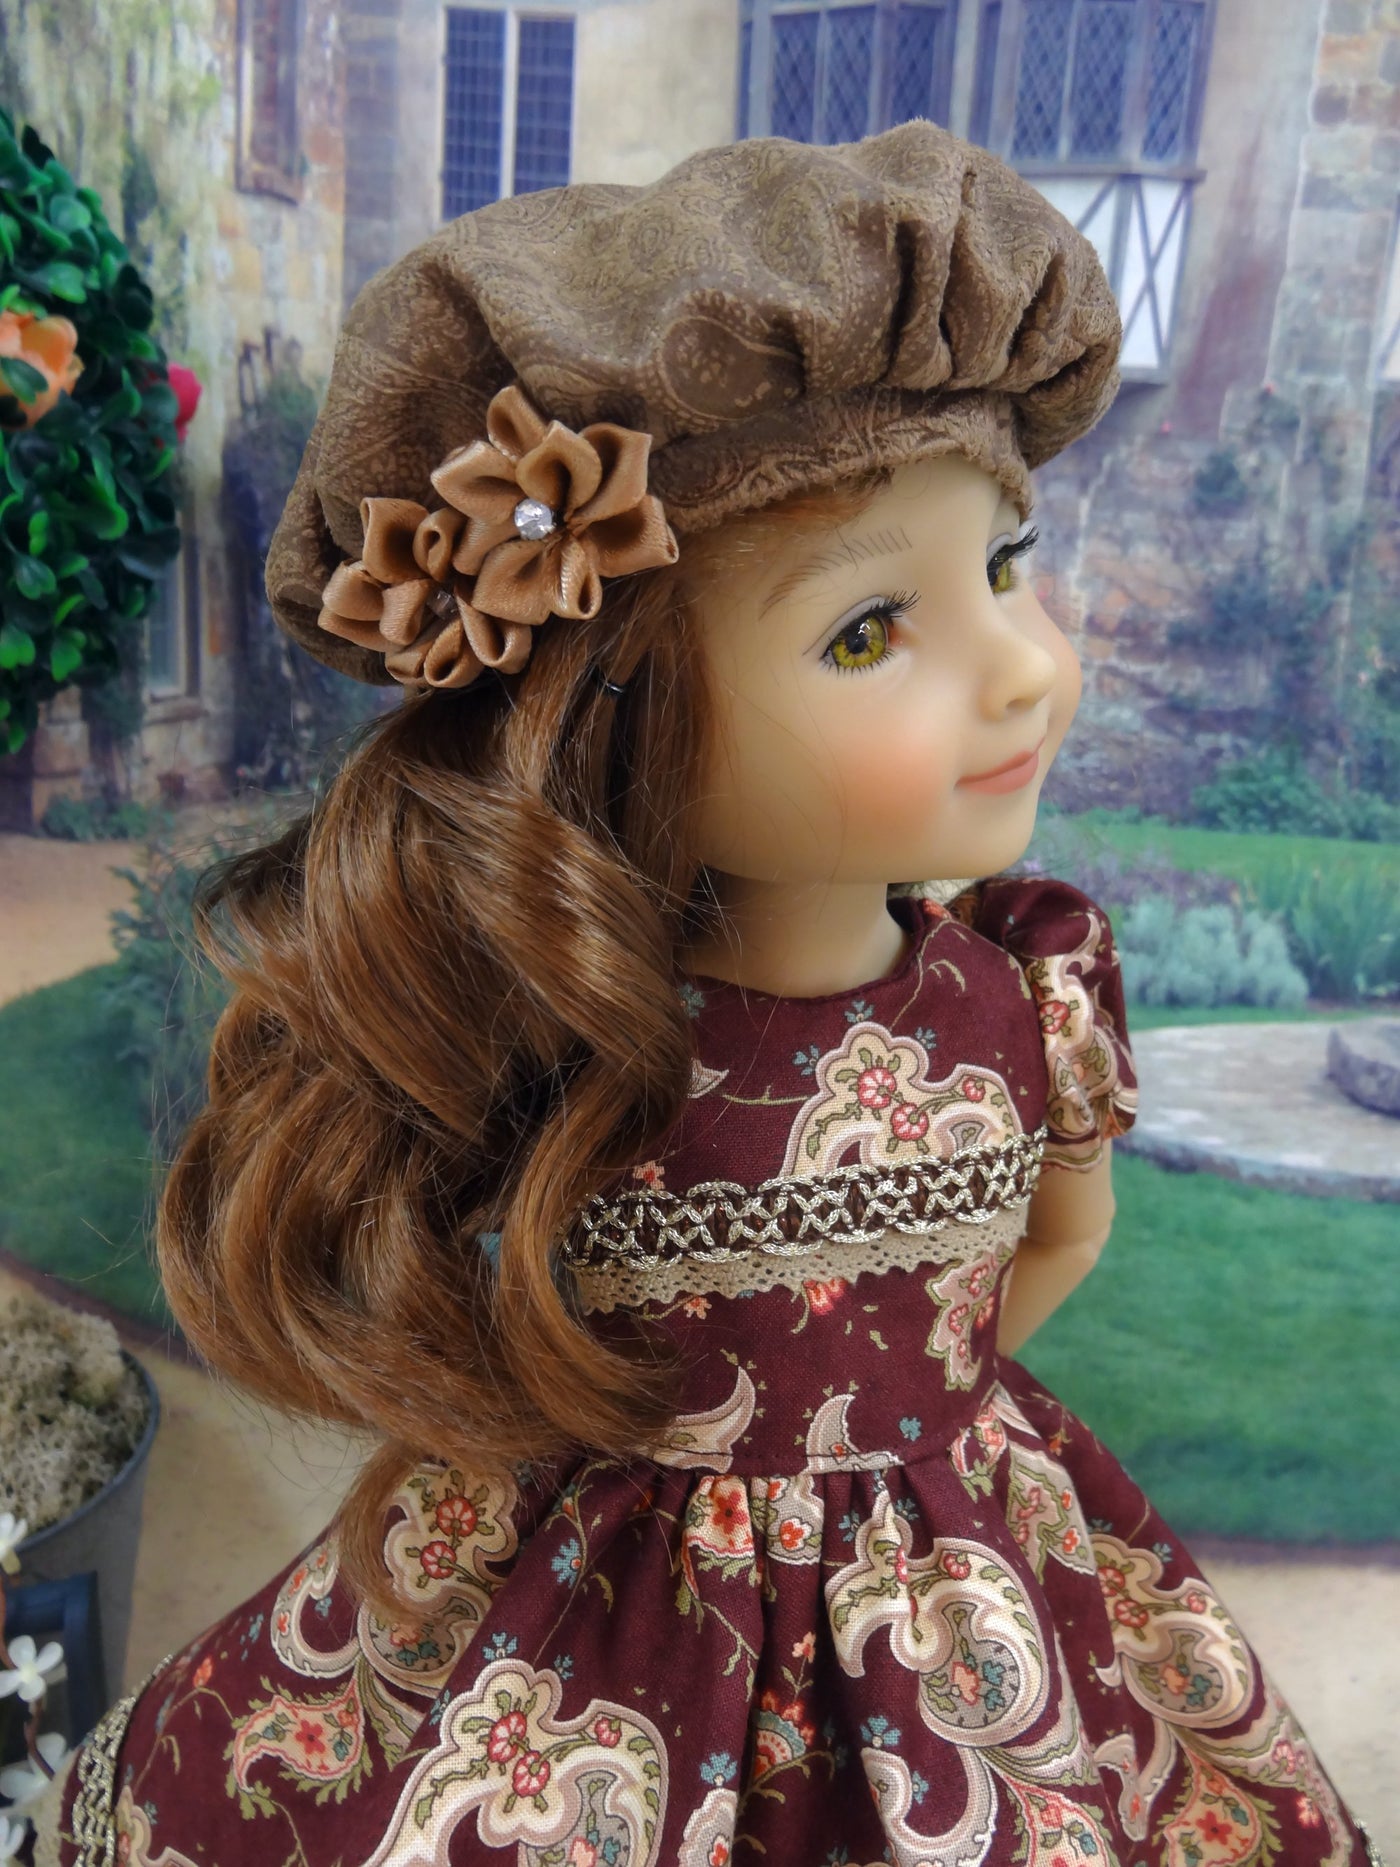 Autumn Paisley - dress & capelet for Ruby Red Fashion Friends doll